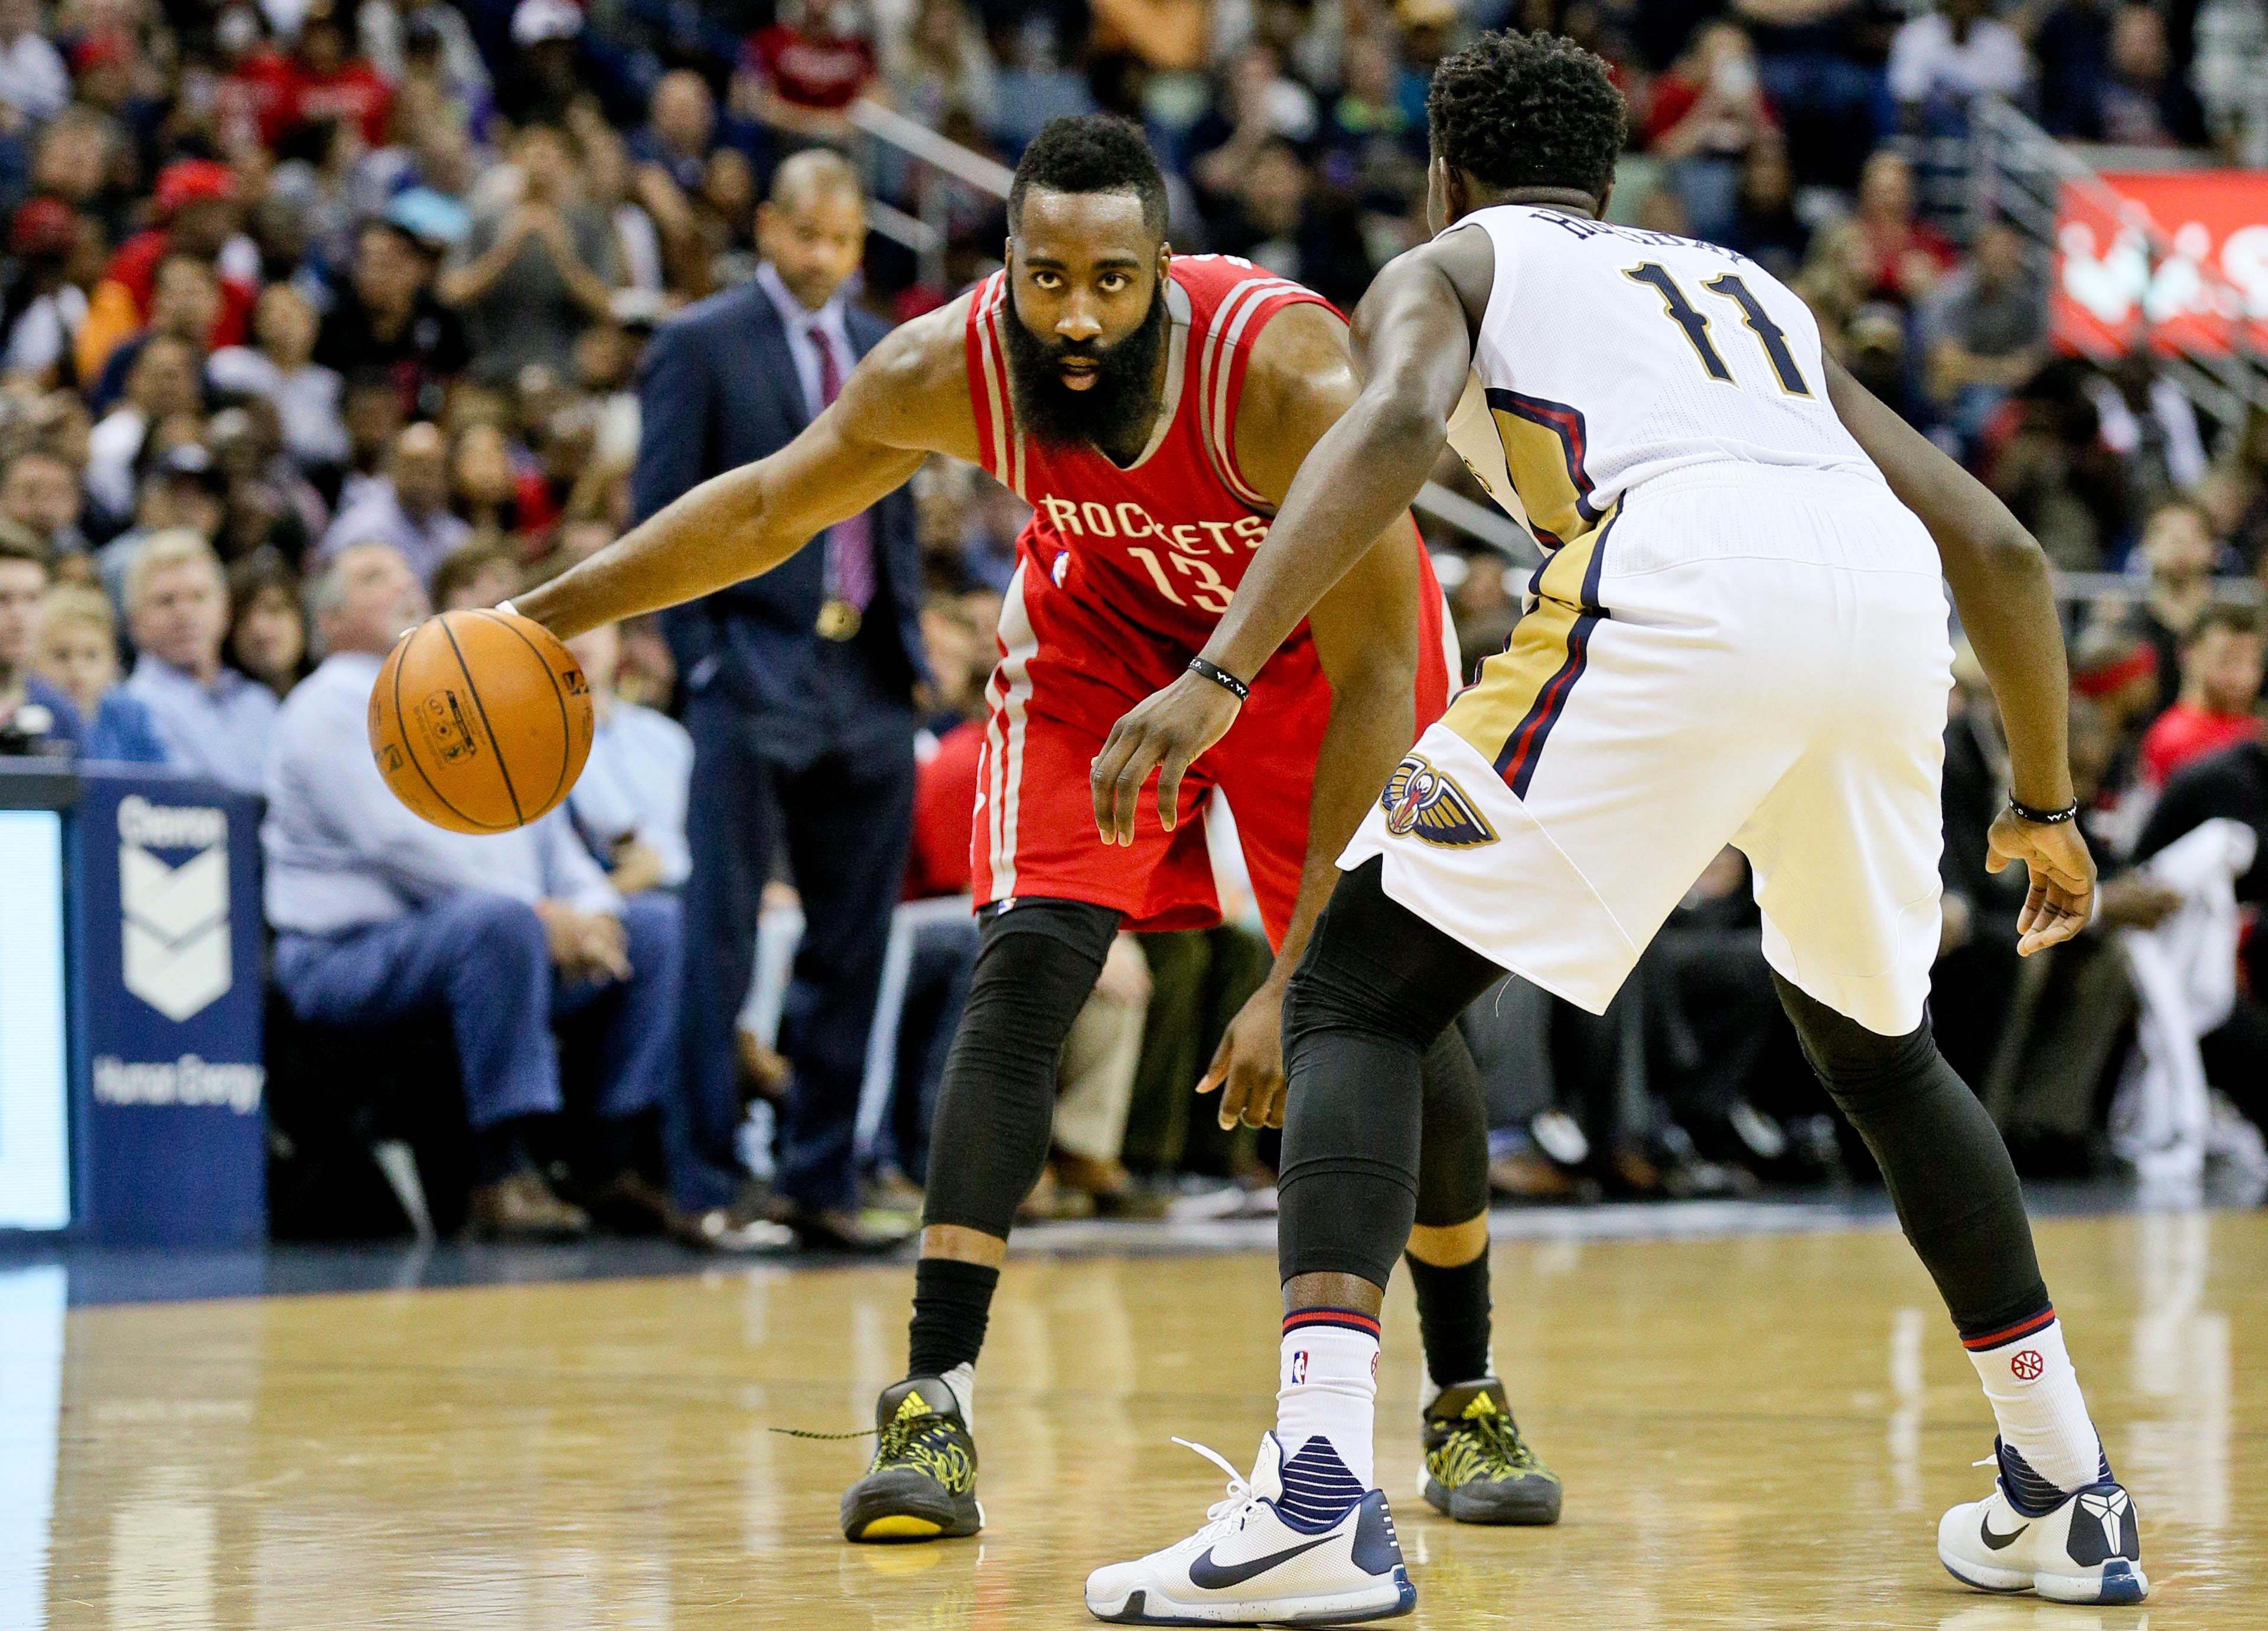 Rockets' preseason schedule features games in China